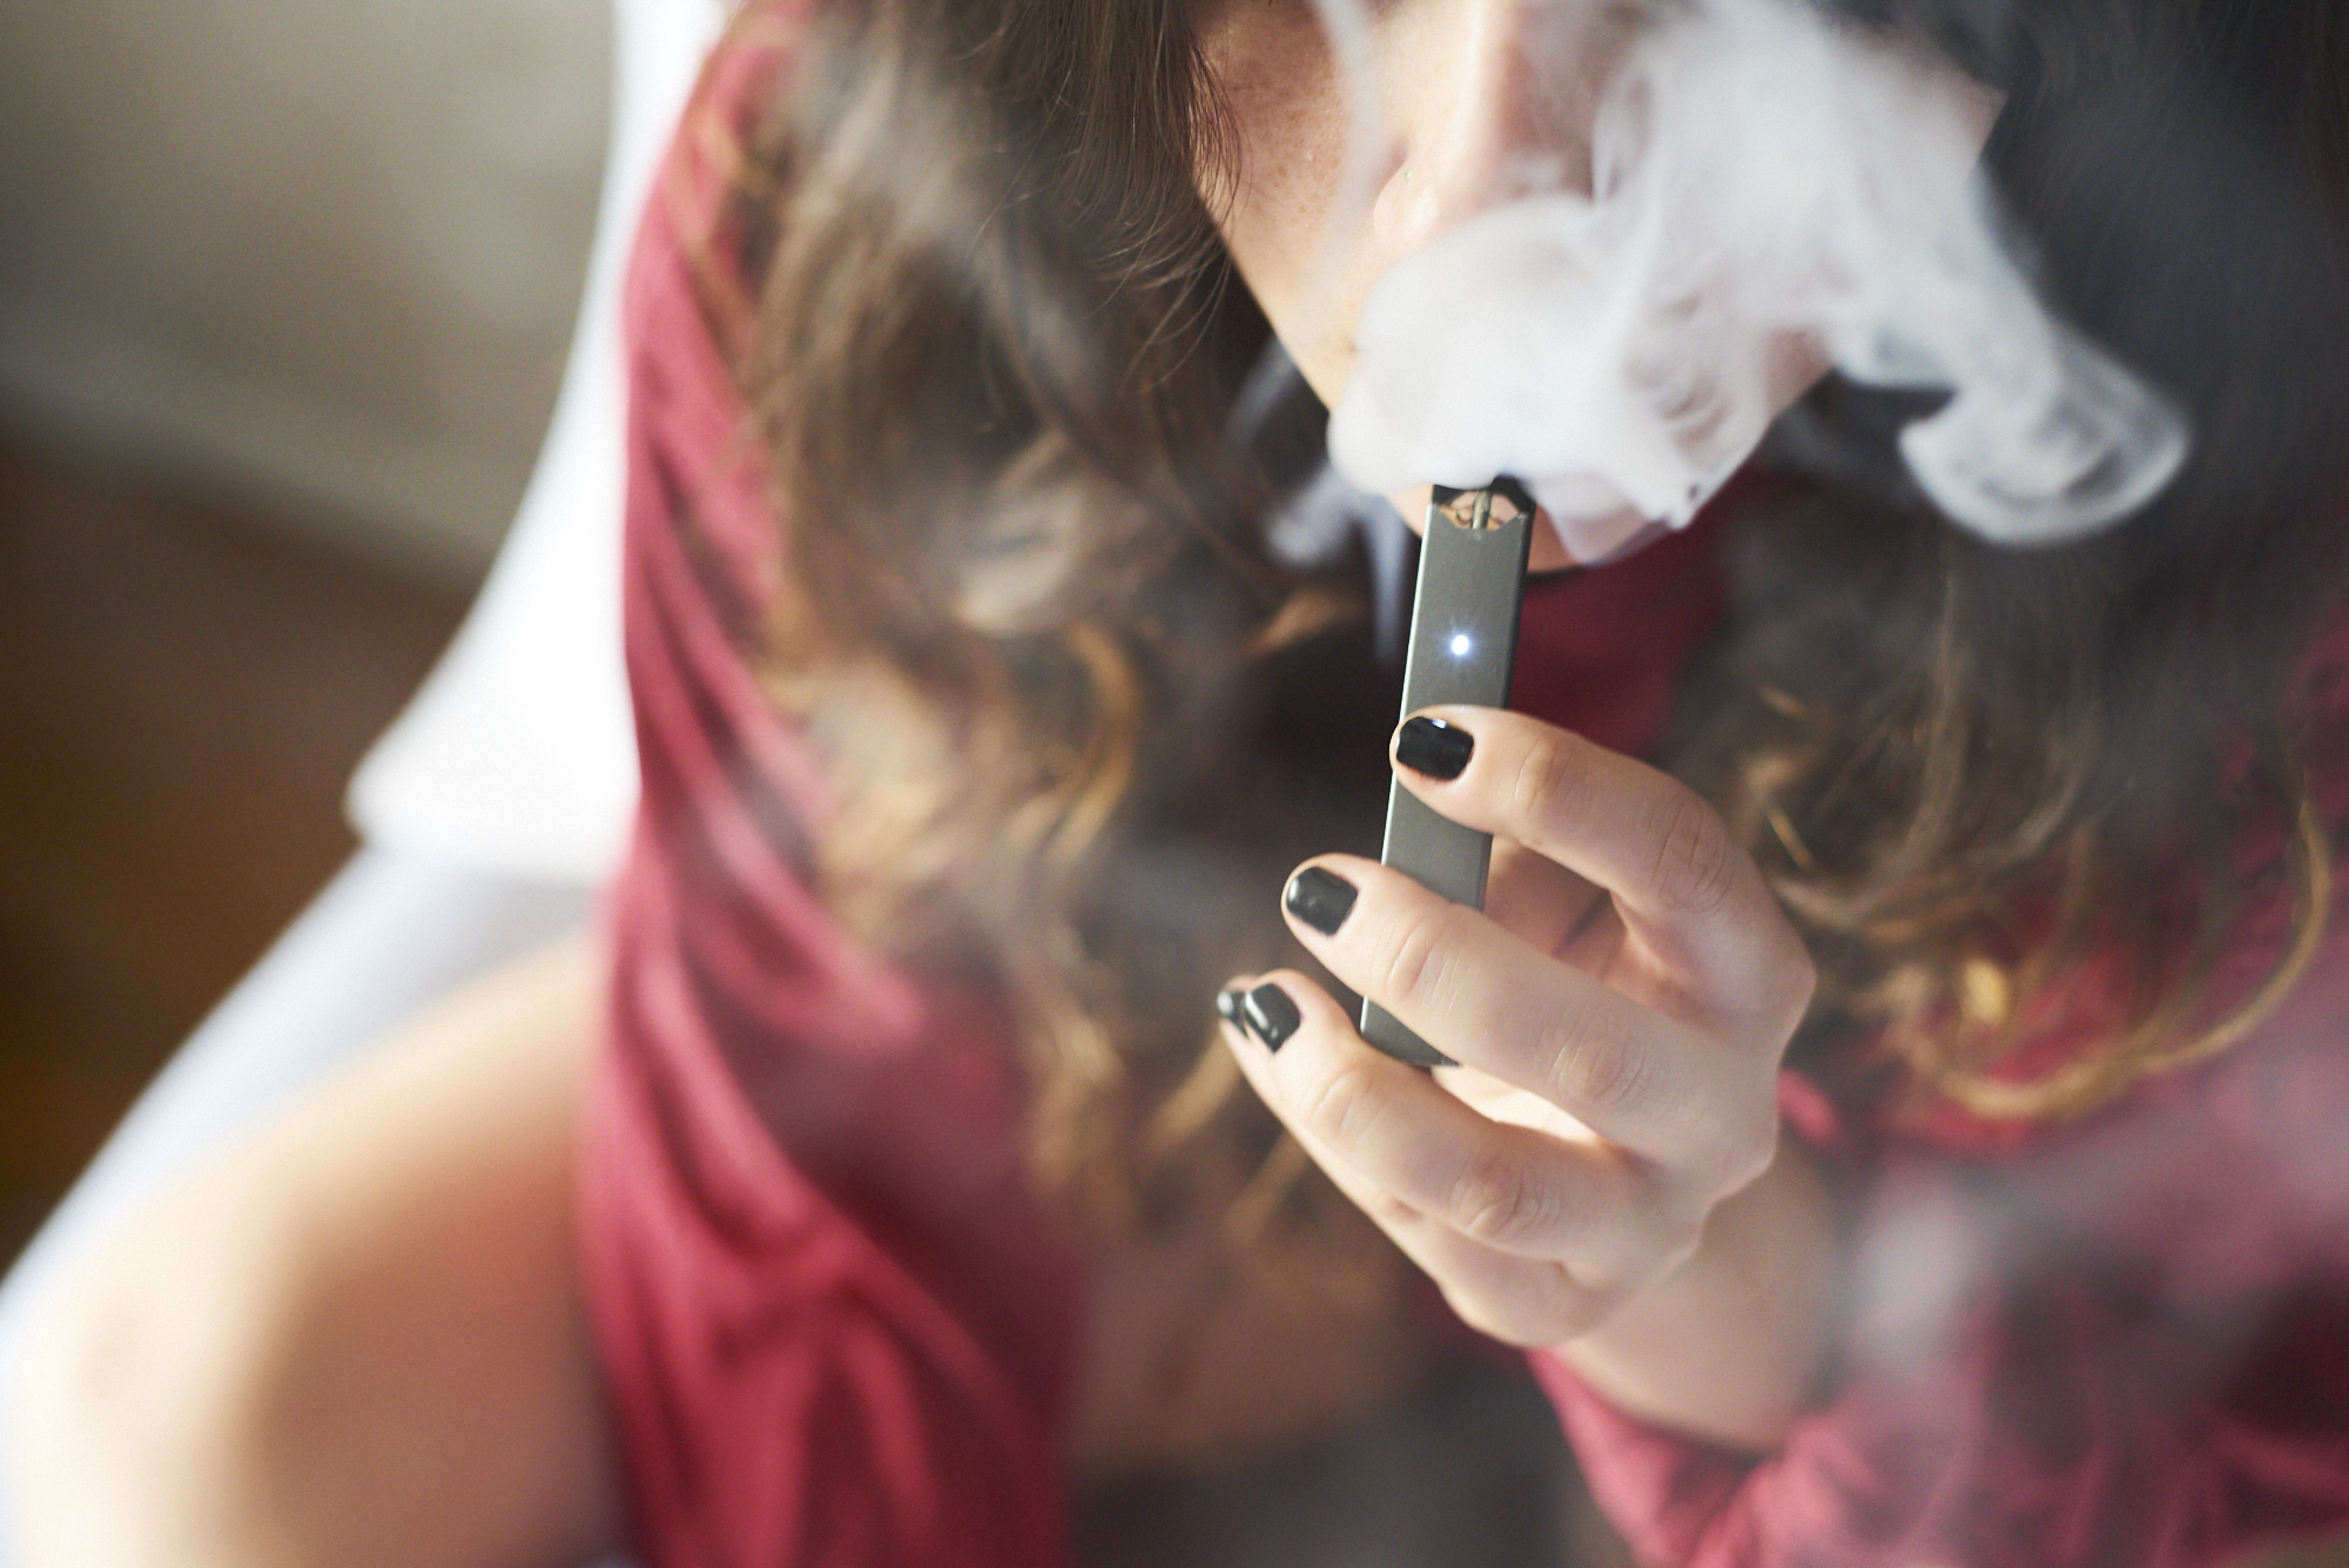 Juul study shows secondhand vaping emissions are less toxic than cigarette smoke